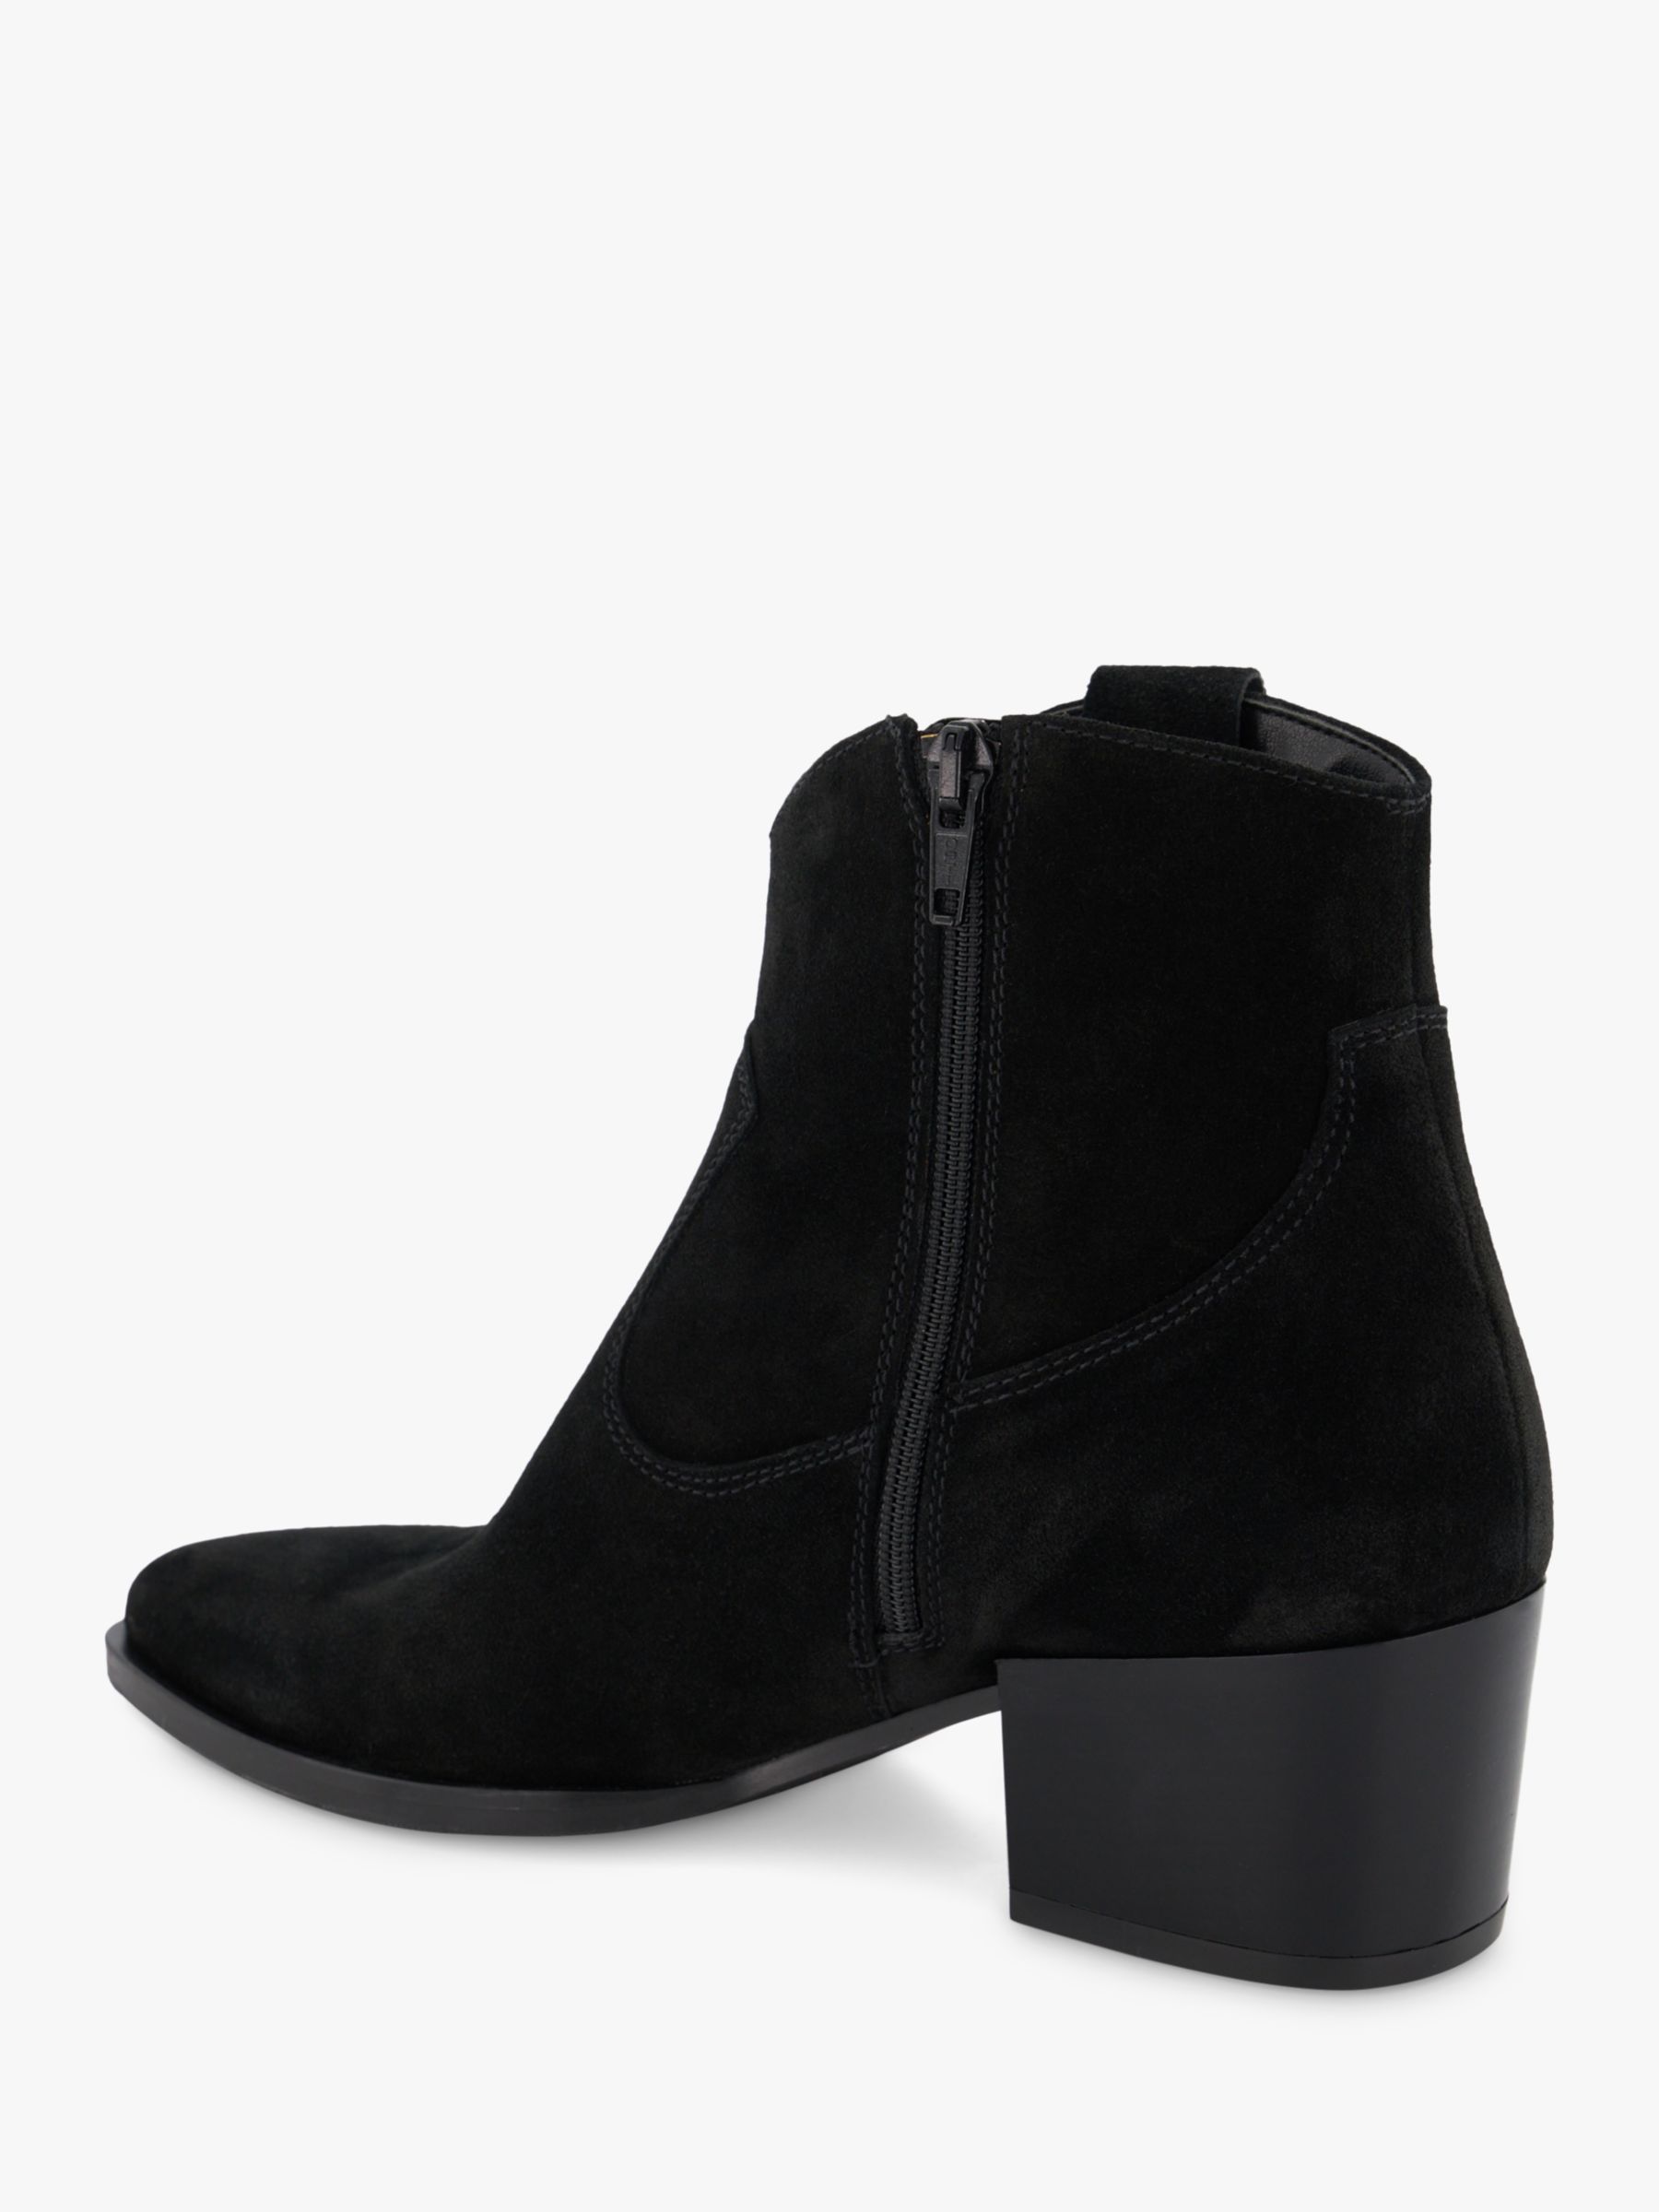 Buy Dune Possibility Suede Western Boots, Black Online at johnlewis.com